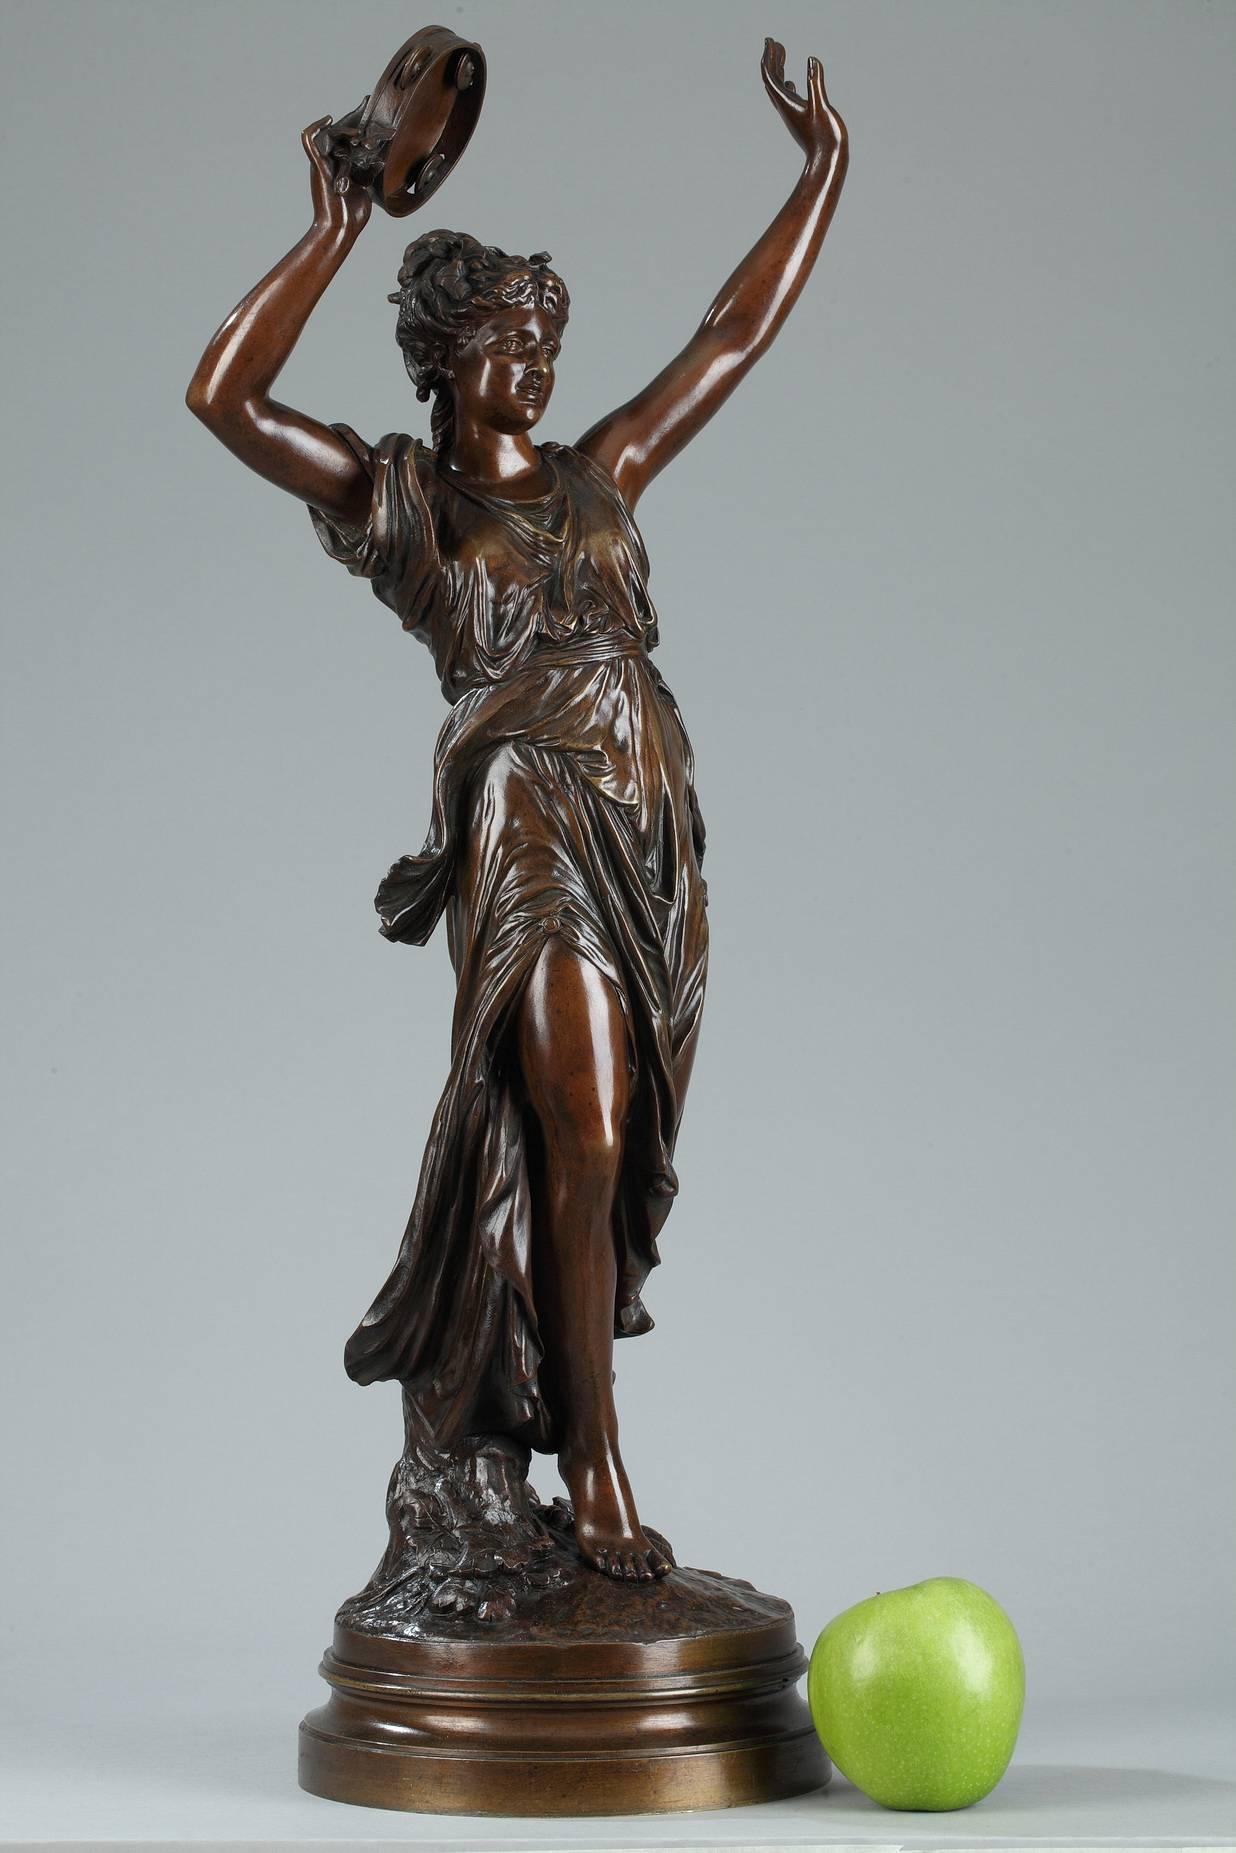 Patinated bronze sculpture featuring a dancing Bacchant playing a tambourine. This work by Gregoire with a musical theme joins his other similarly-themed works such as L'Allégro, Mozart Enfant (Mozart as a Child) and Un Artiste au XVIIe Siècle